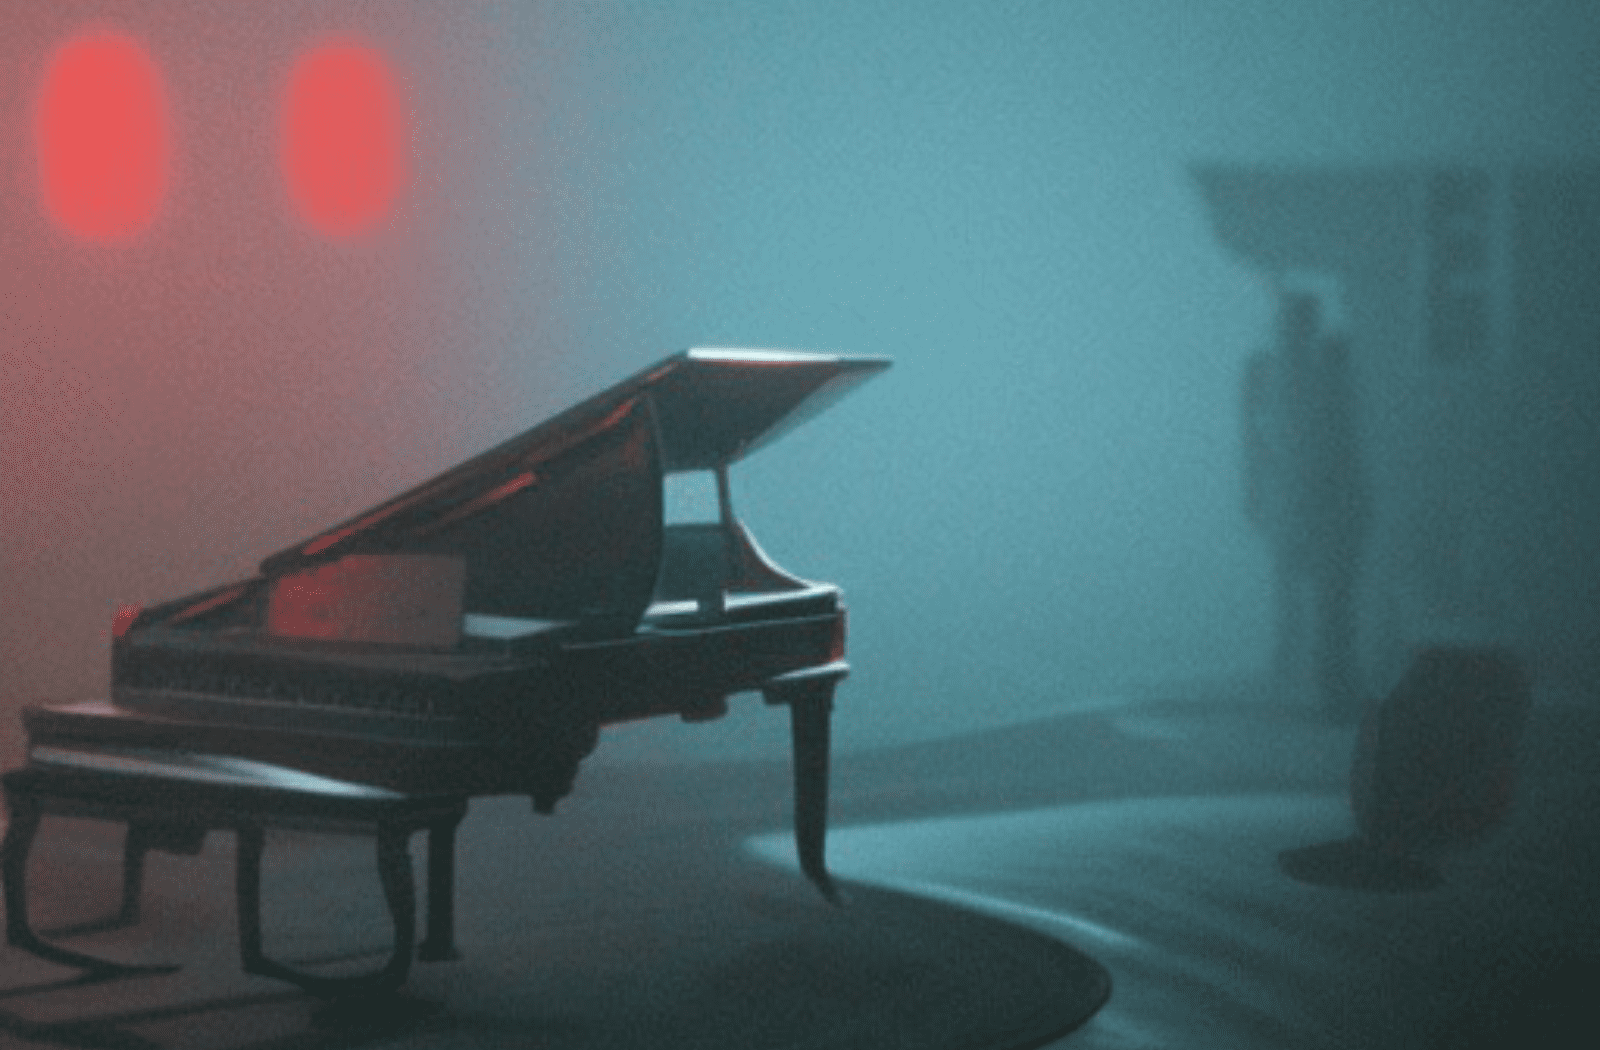 The Constant Self - an AI generated piano and figure in a misty blue and red room